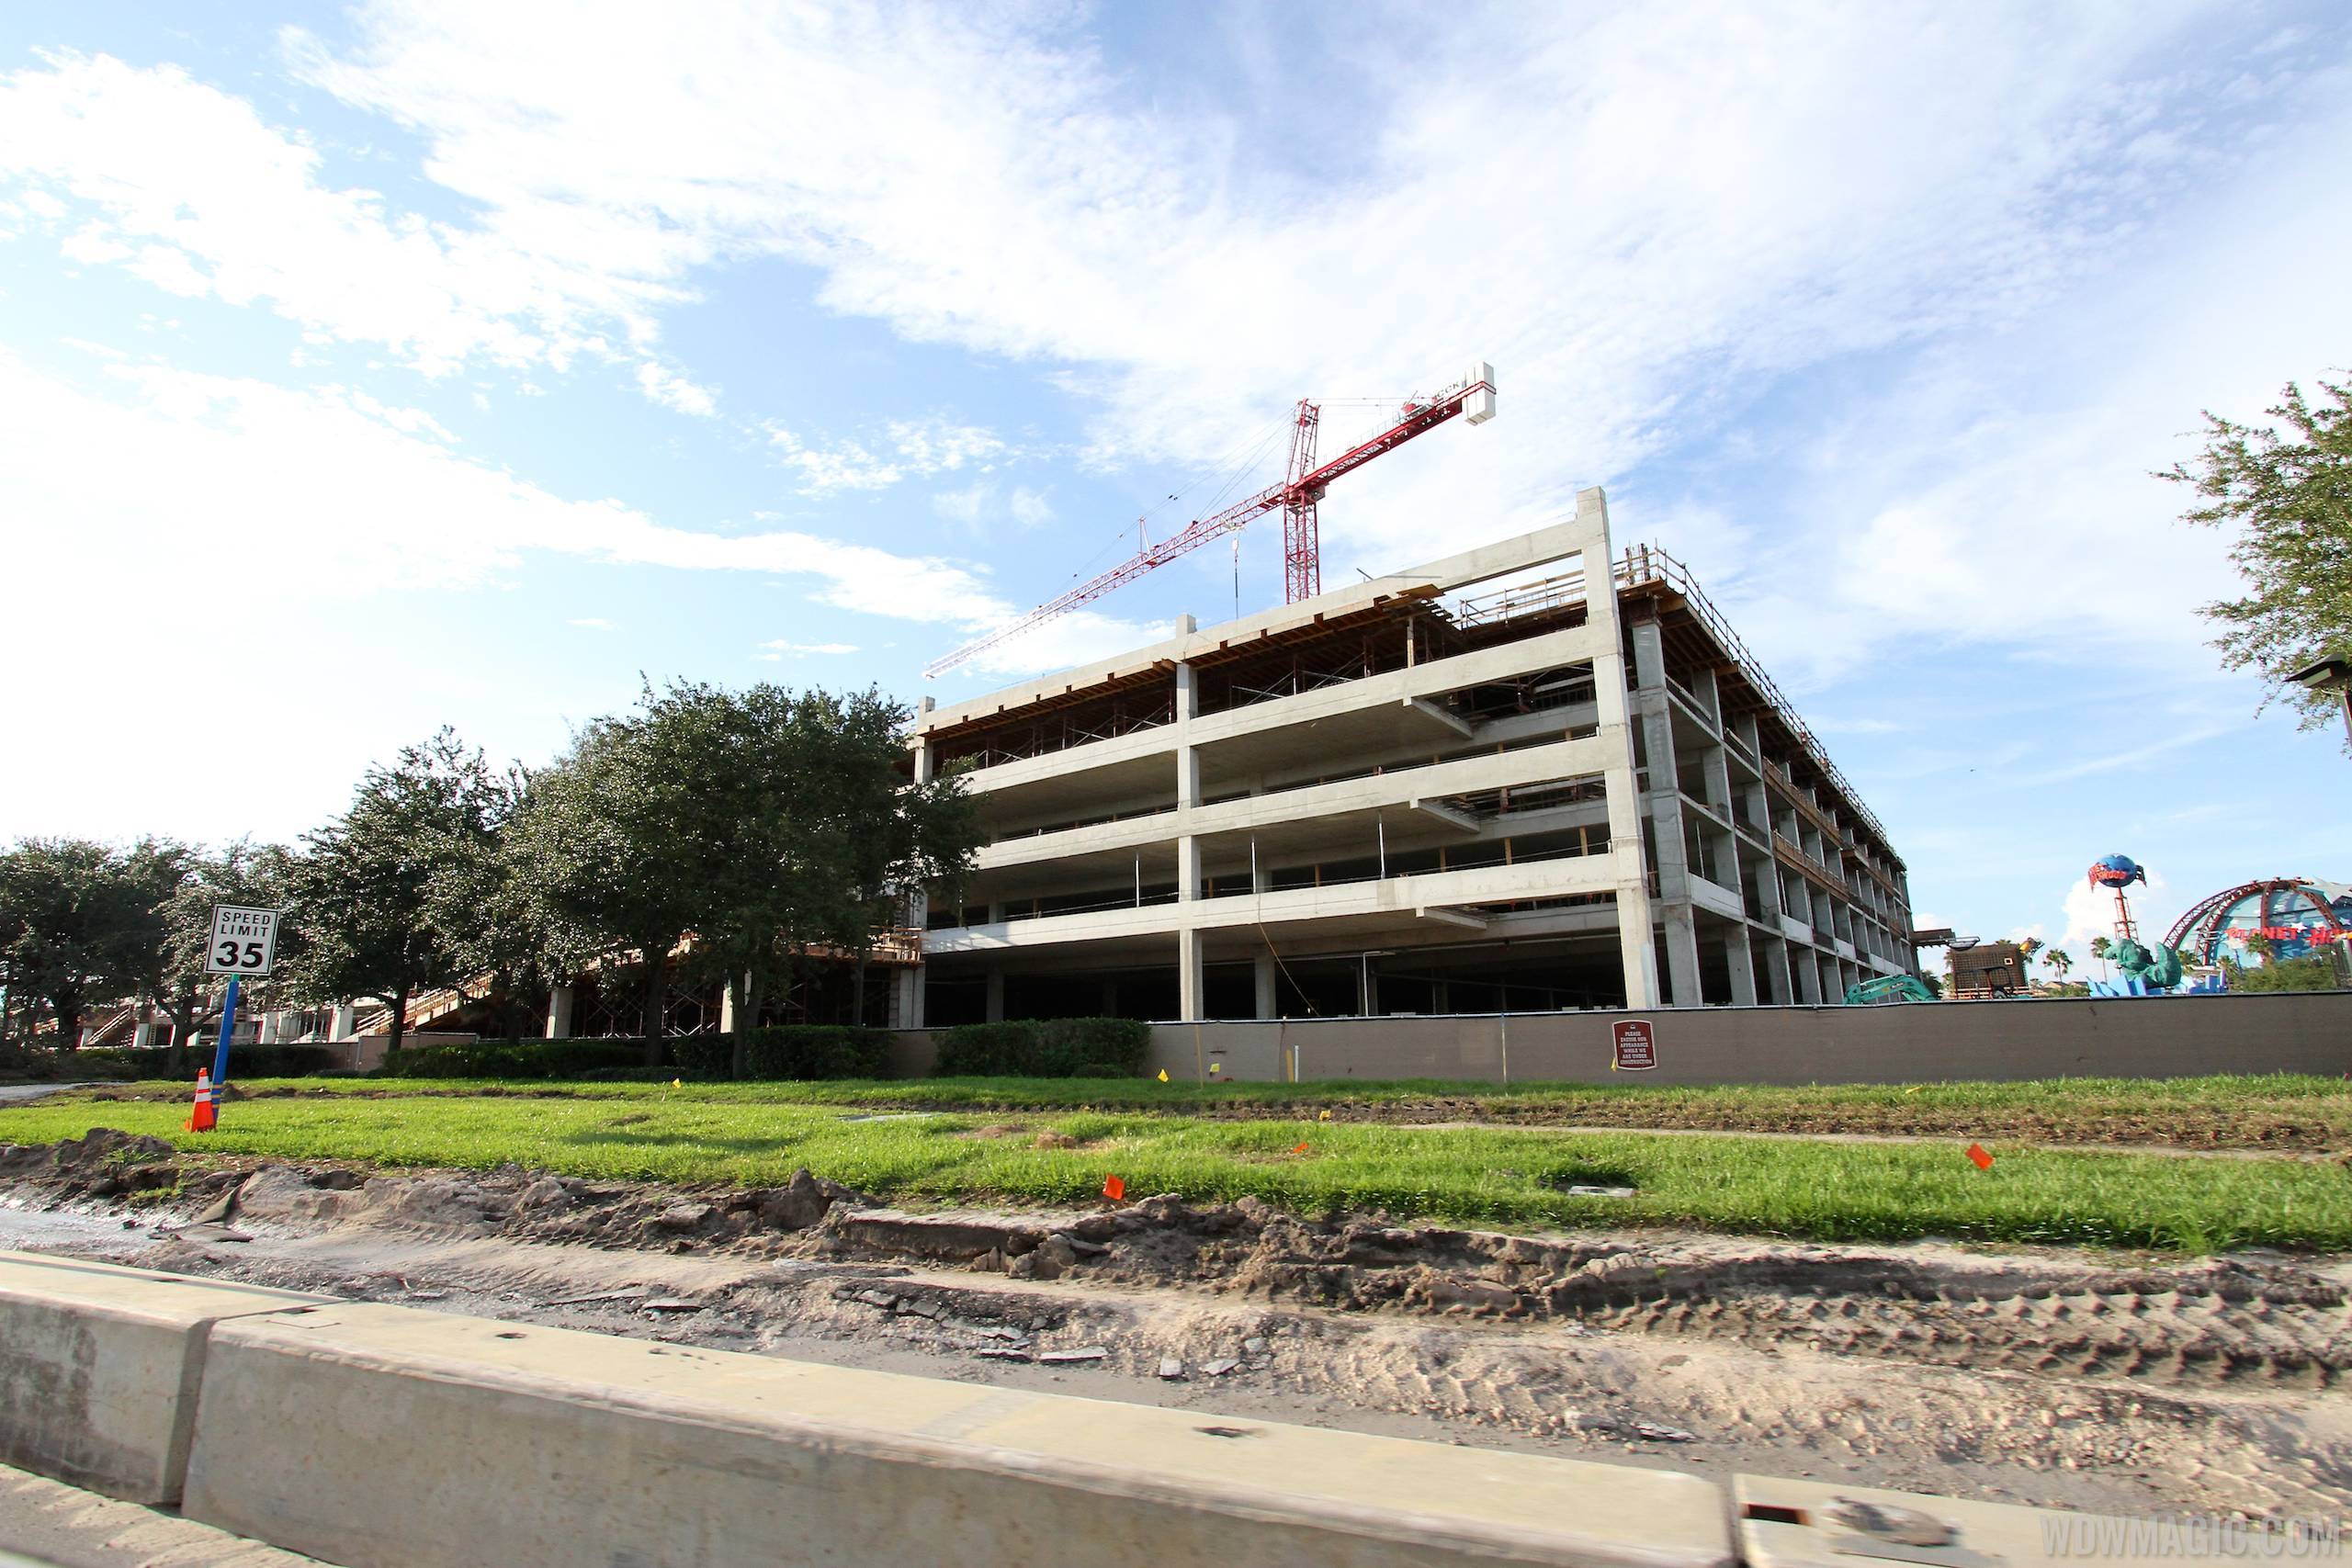 PHOTOS - View of the Disney Springs West Side parking garage from Buena Vista Drive